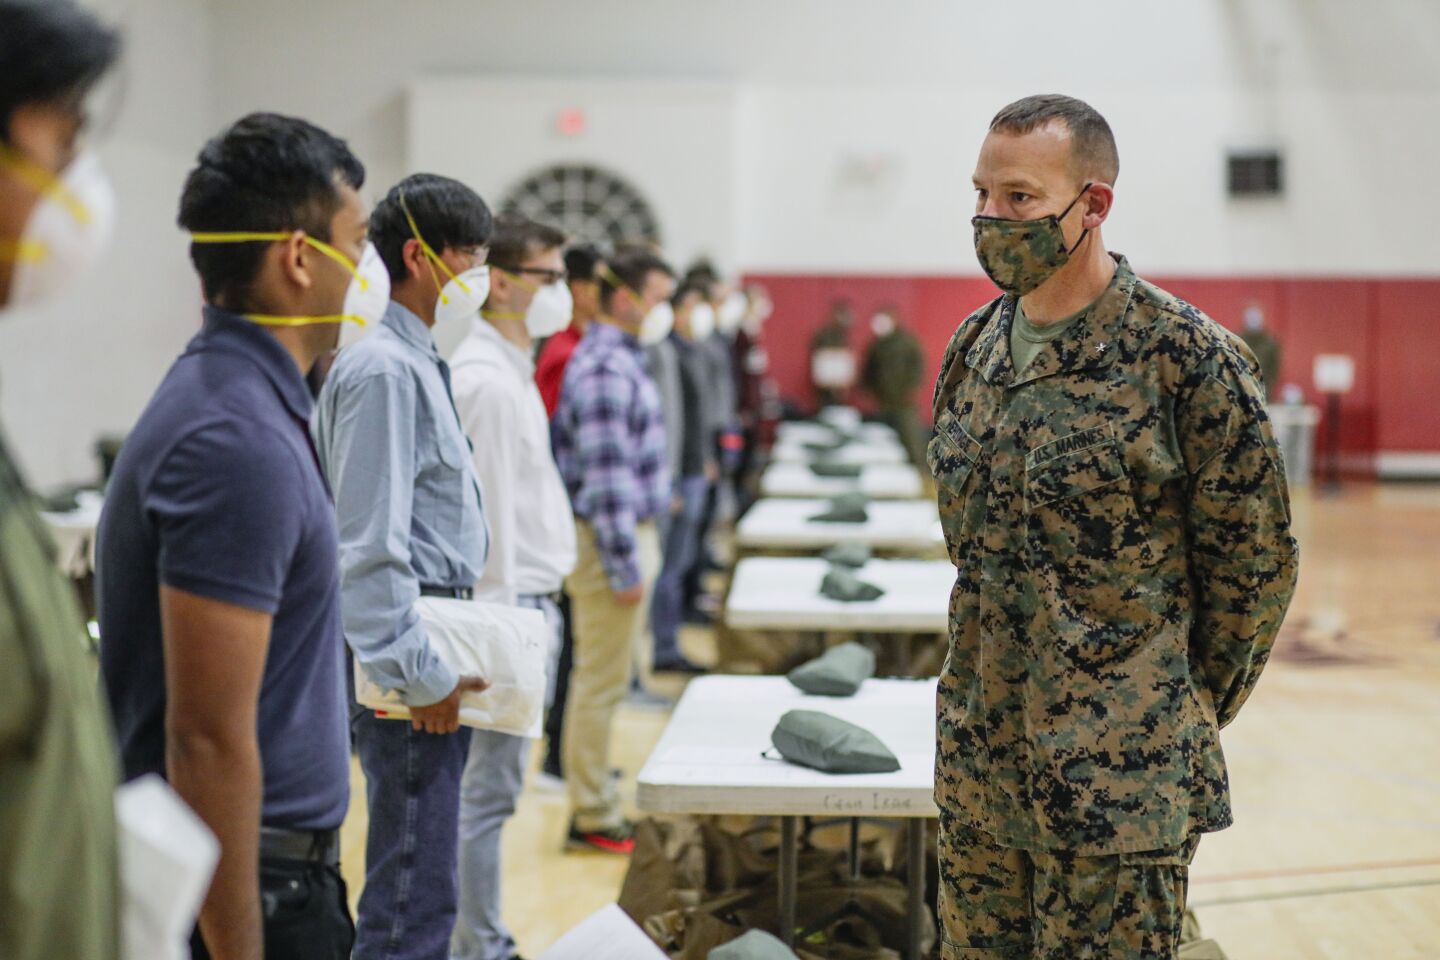 Brig. Gen. Ryan Heritage speaks with marine recruits at the Marine Corp Recruit Depot(MCRD) on Monday, April 13, 2020. New COVID-19 distancing practices have gone into effect for new recruits such as standing six feet apart, health screening and a 14-day quarantine period before boot camp begins.